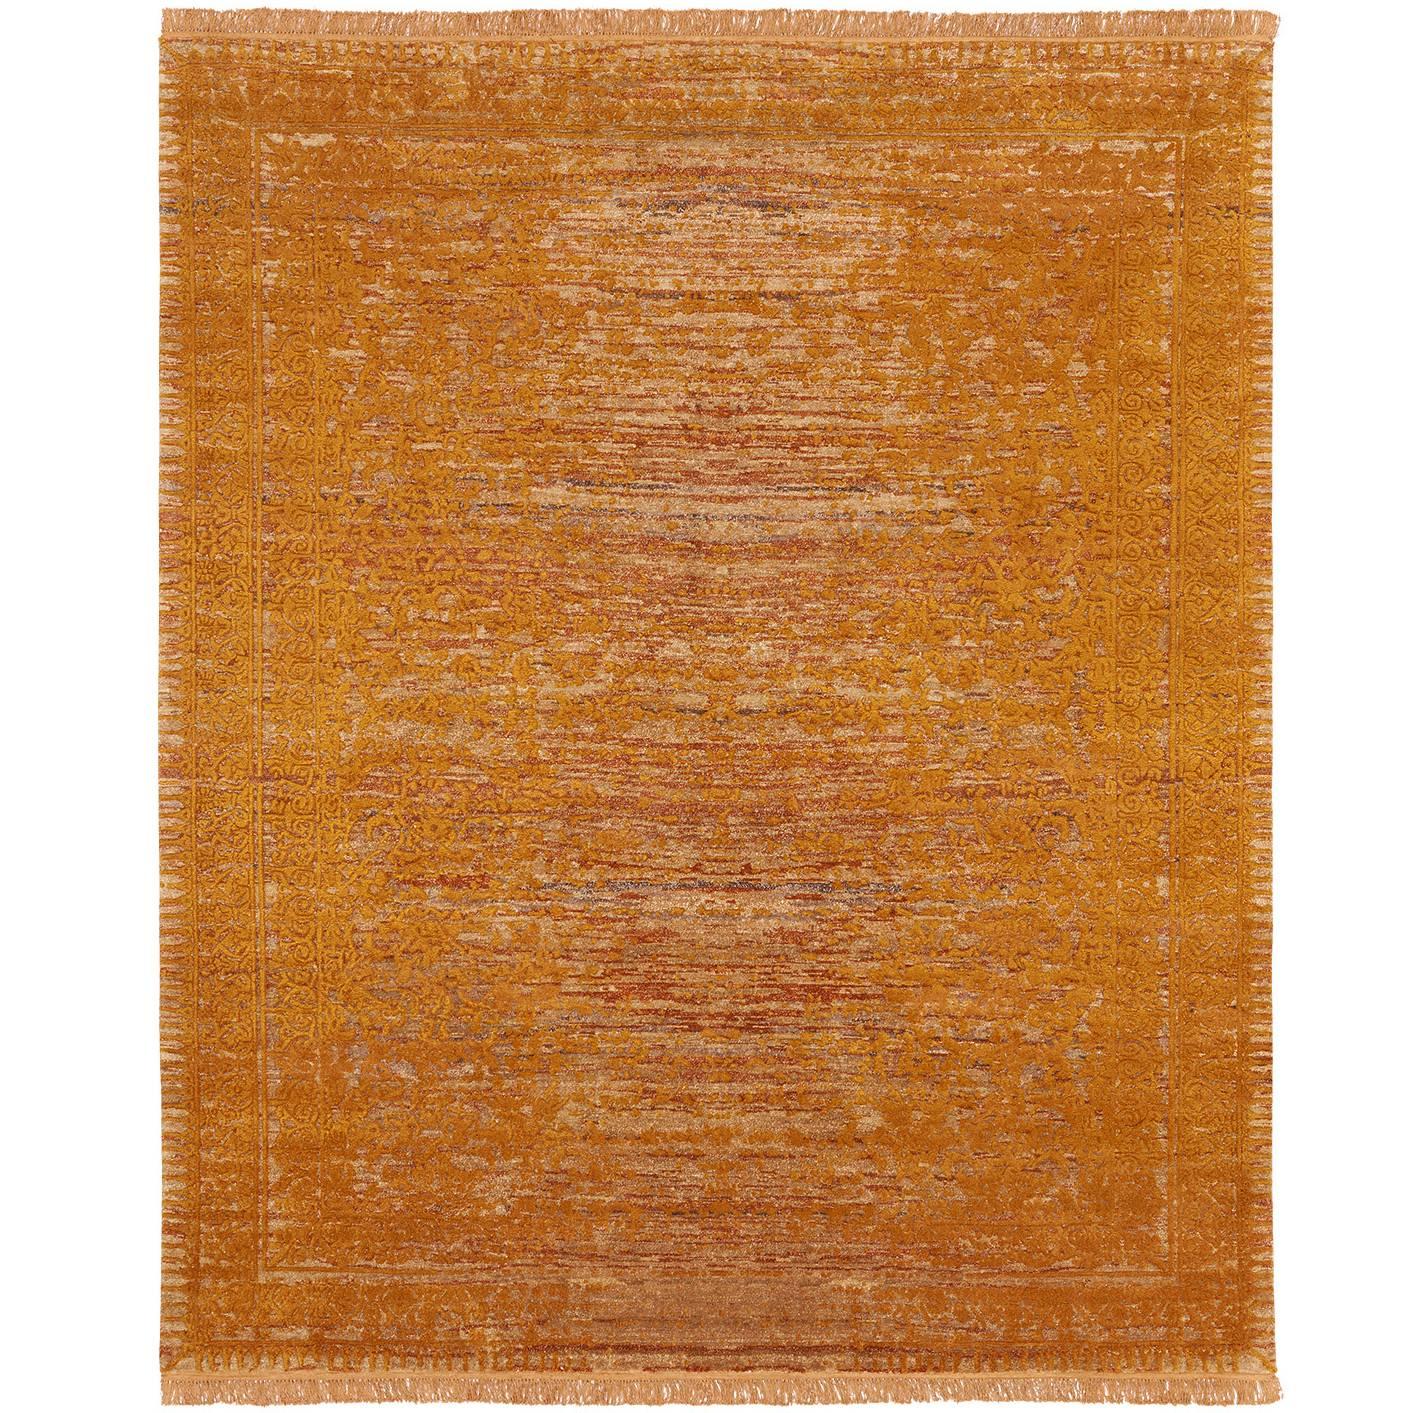 Ferrara Radi Stomped Reverse from Radi Deluxe Carpet Collection by Jan Kath For Sale